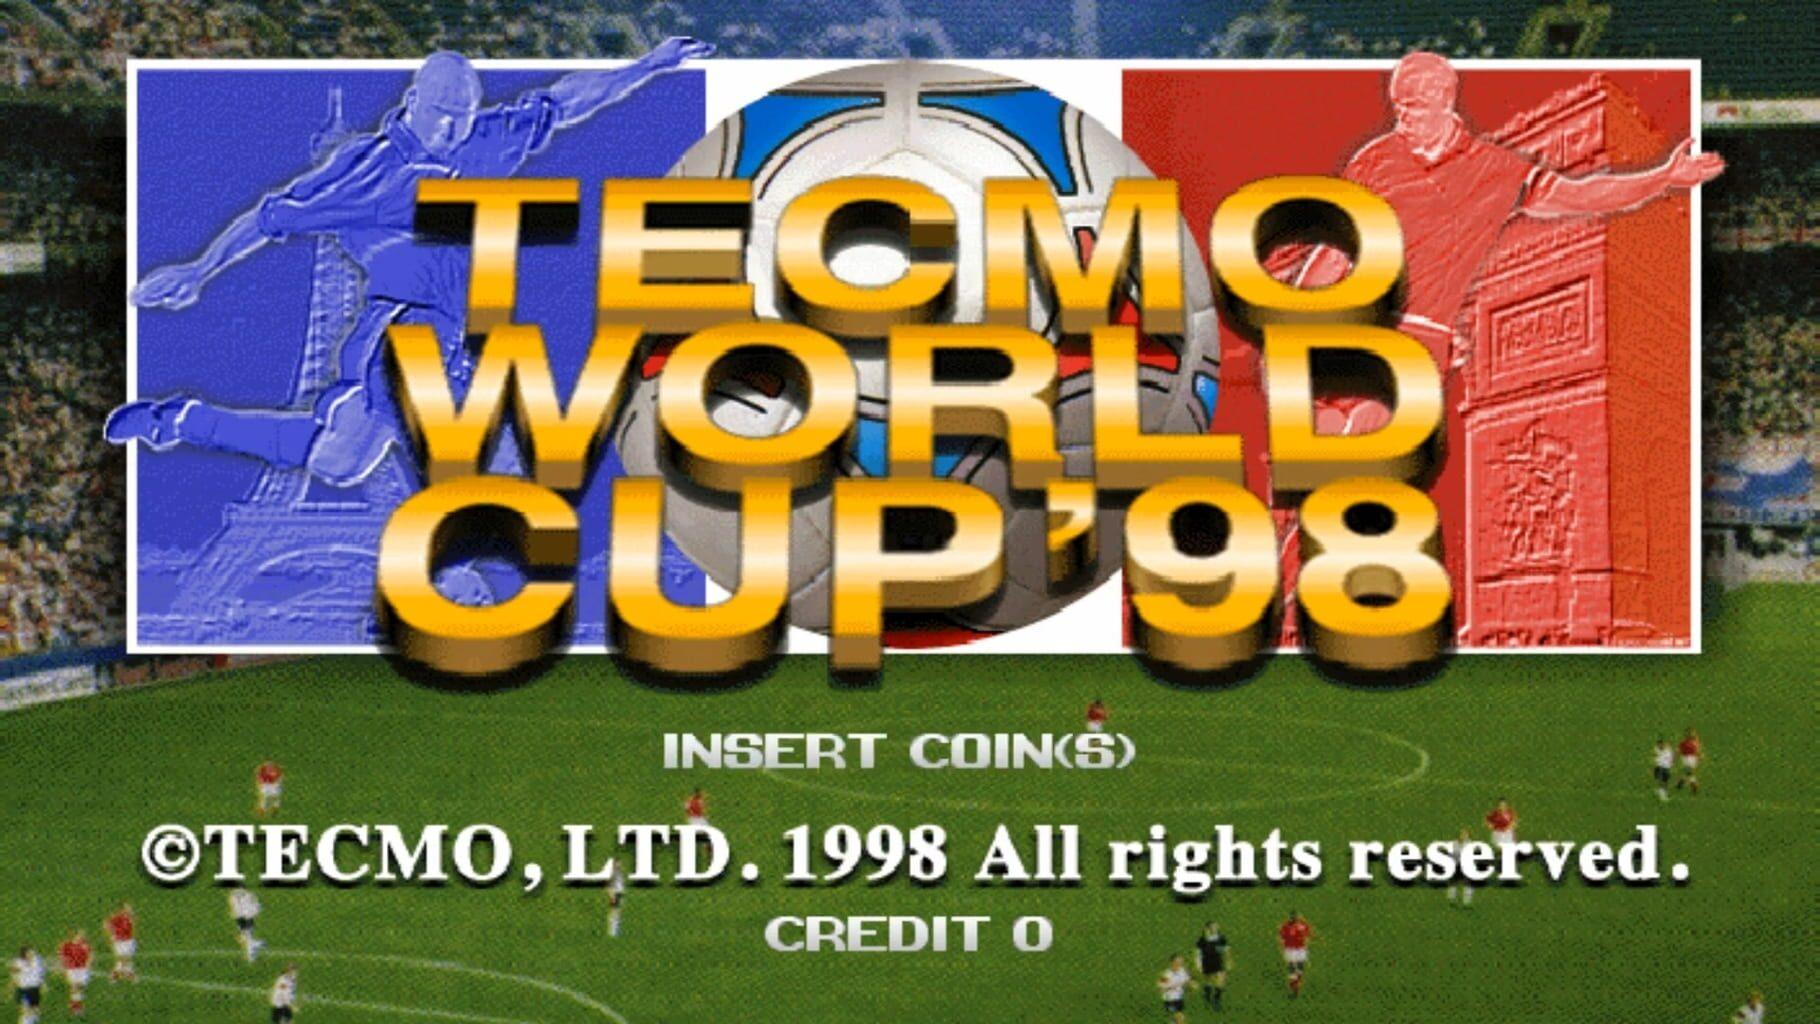 Tecmo World Cup '98 cover art